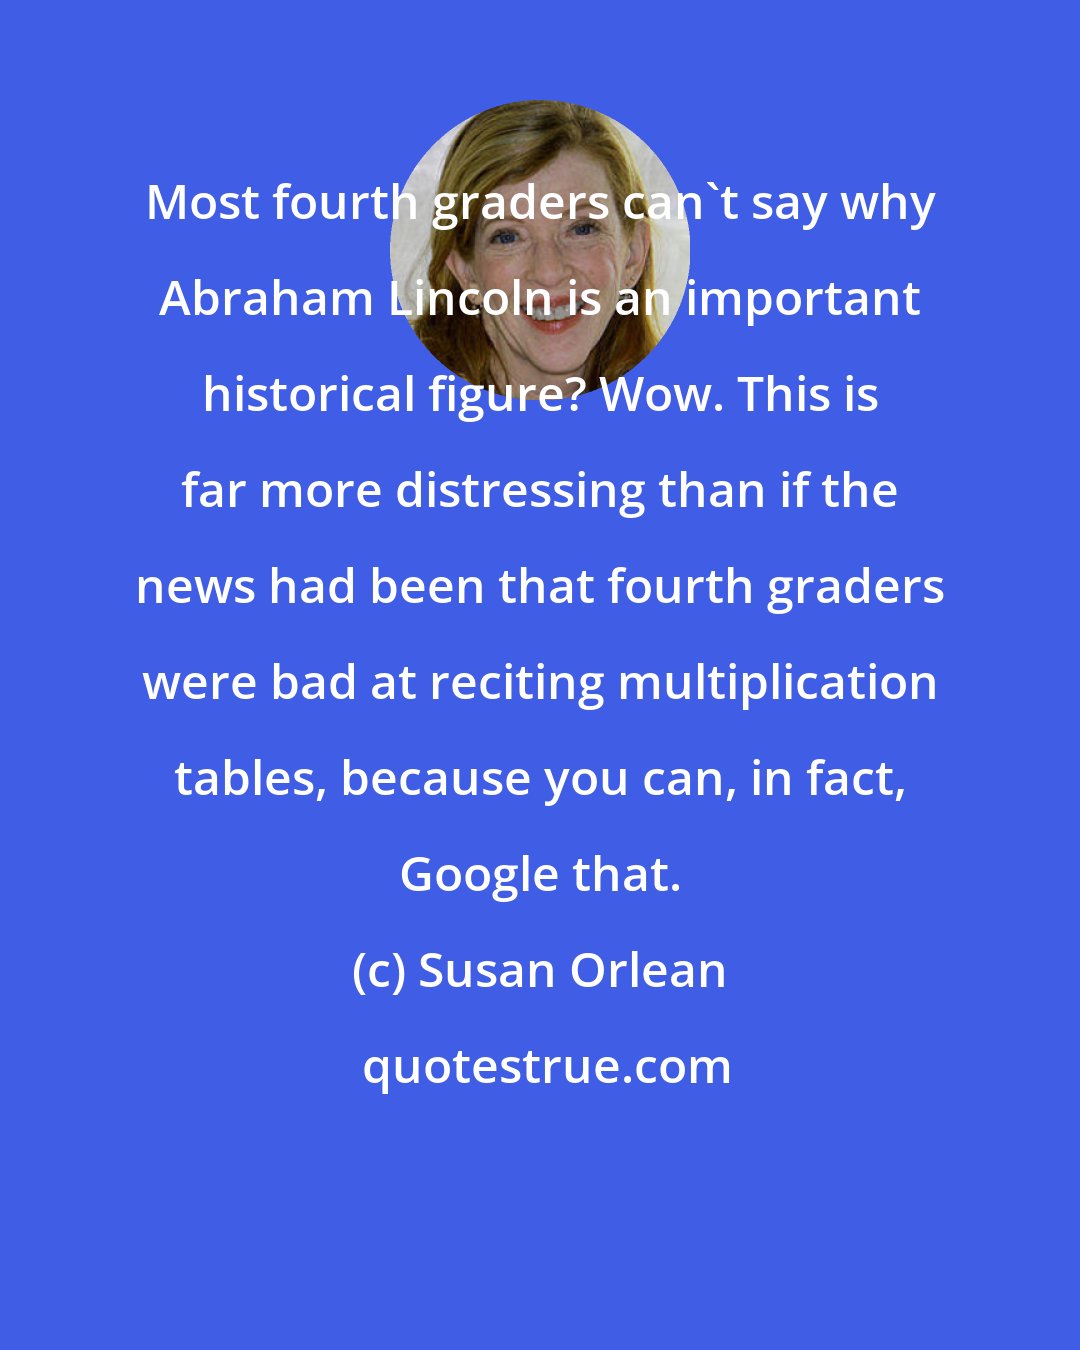 Susan Orlean: Most fourth graders can't say why Abraham Lincoln is an important historical figure? Wow. This is far more distressing than if the news had been that fourth graders were bad at reciting multiplication tables, because you can, in fact, Google that.